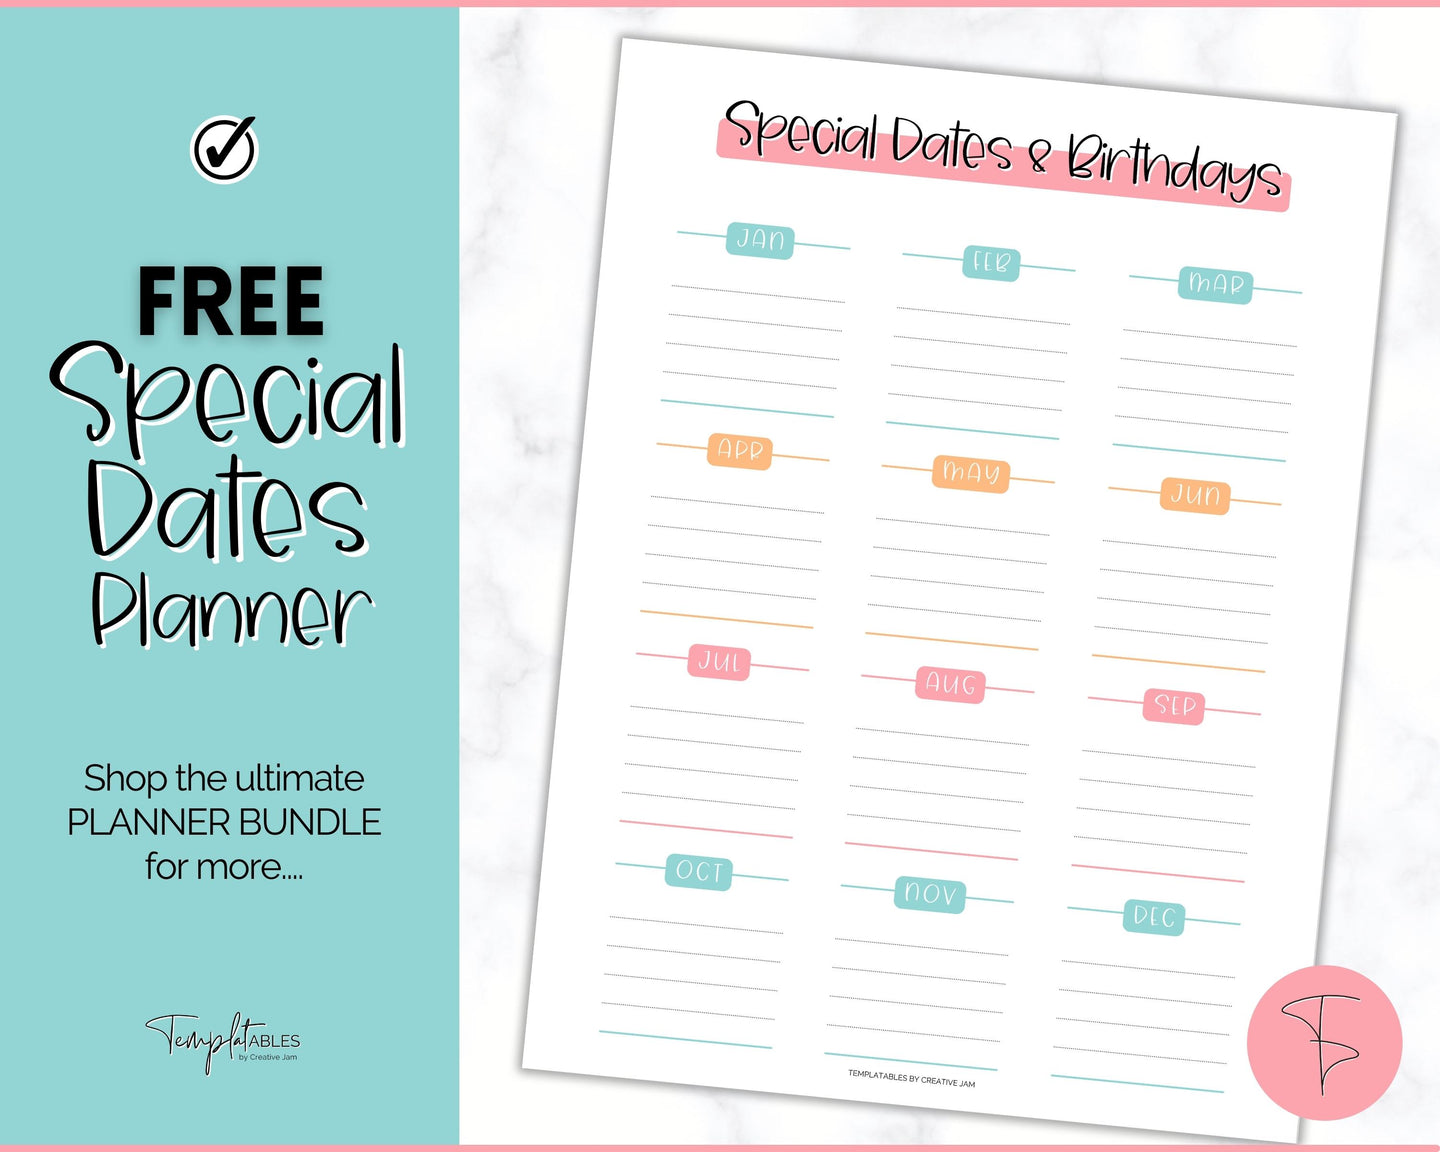 FREE - Special Dates Planner Printable, Annual Calendar, Birthday & Anniversary Reminders, Undated | Colorful Sky